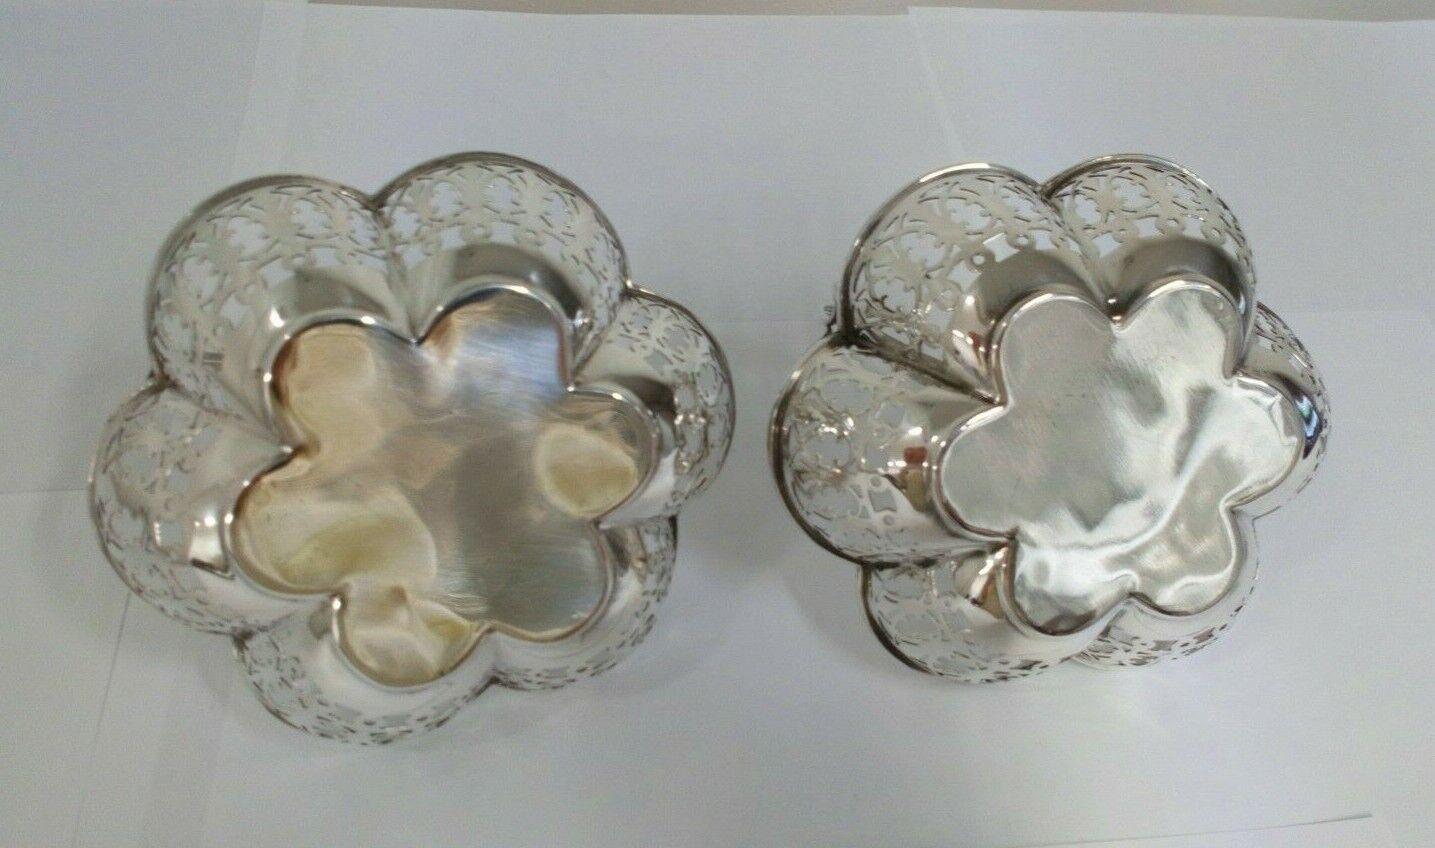 Pair of Pierced Sterling Silver Bonbon Dishes by James Deakin & Sons For Sale 3